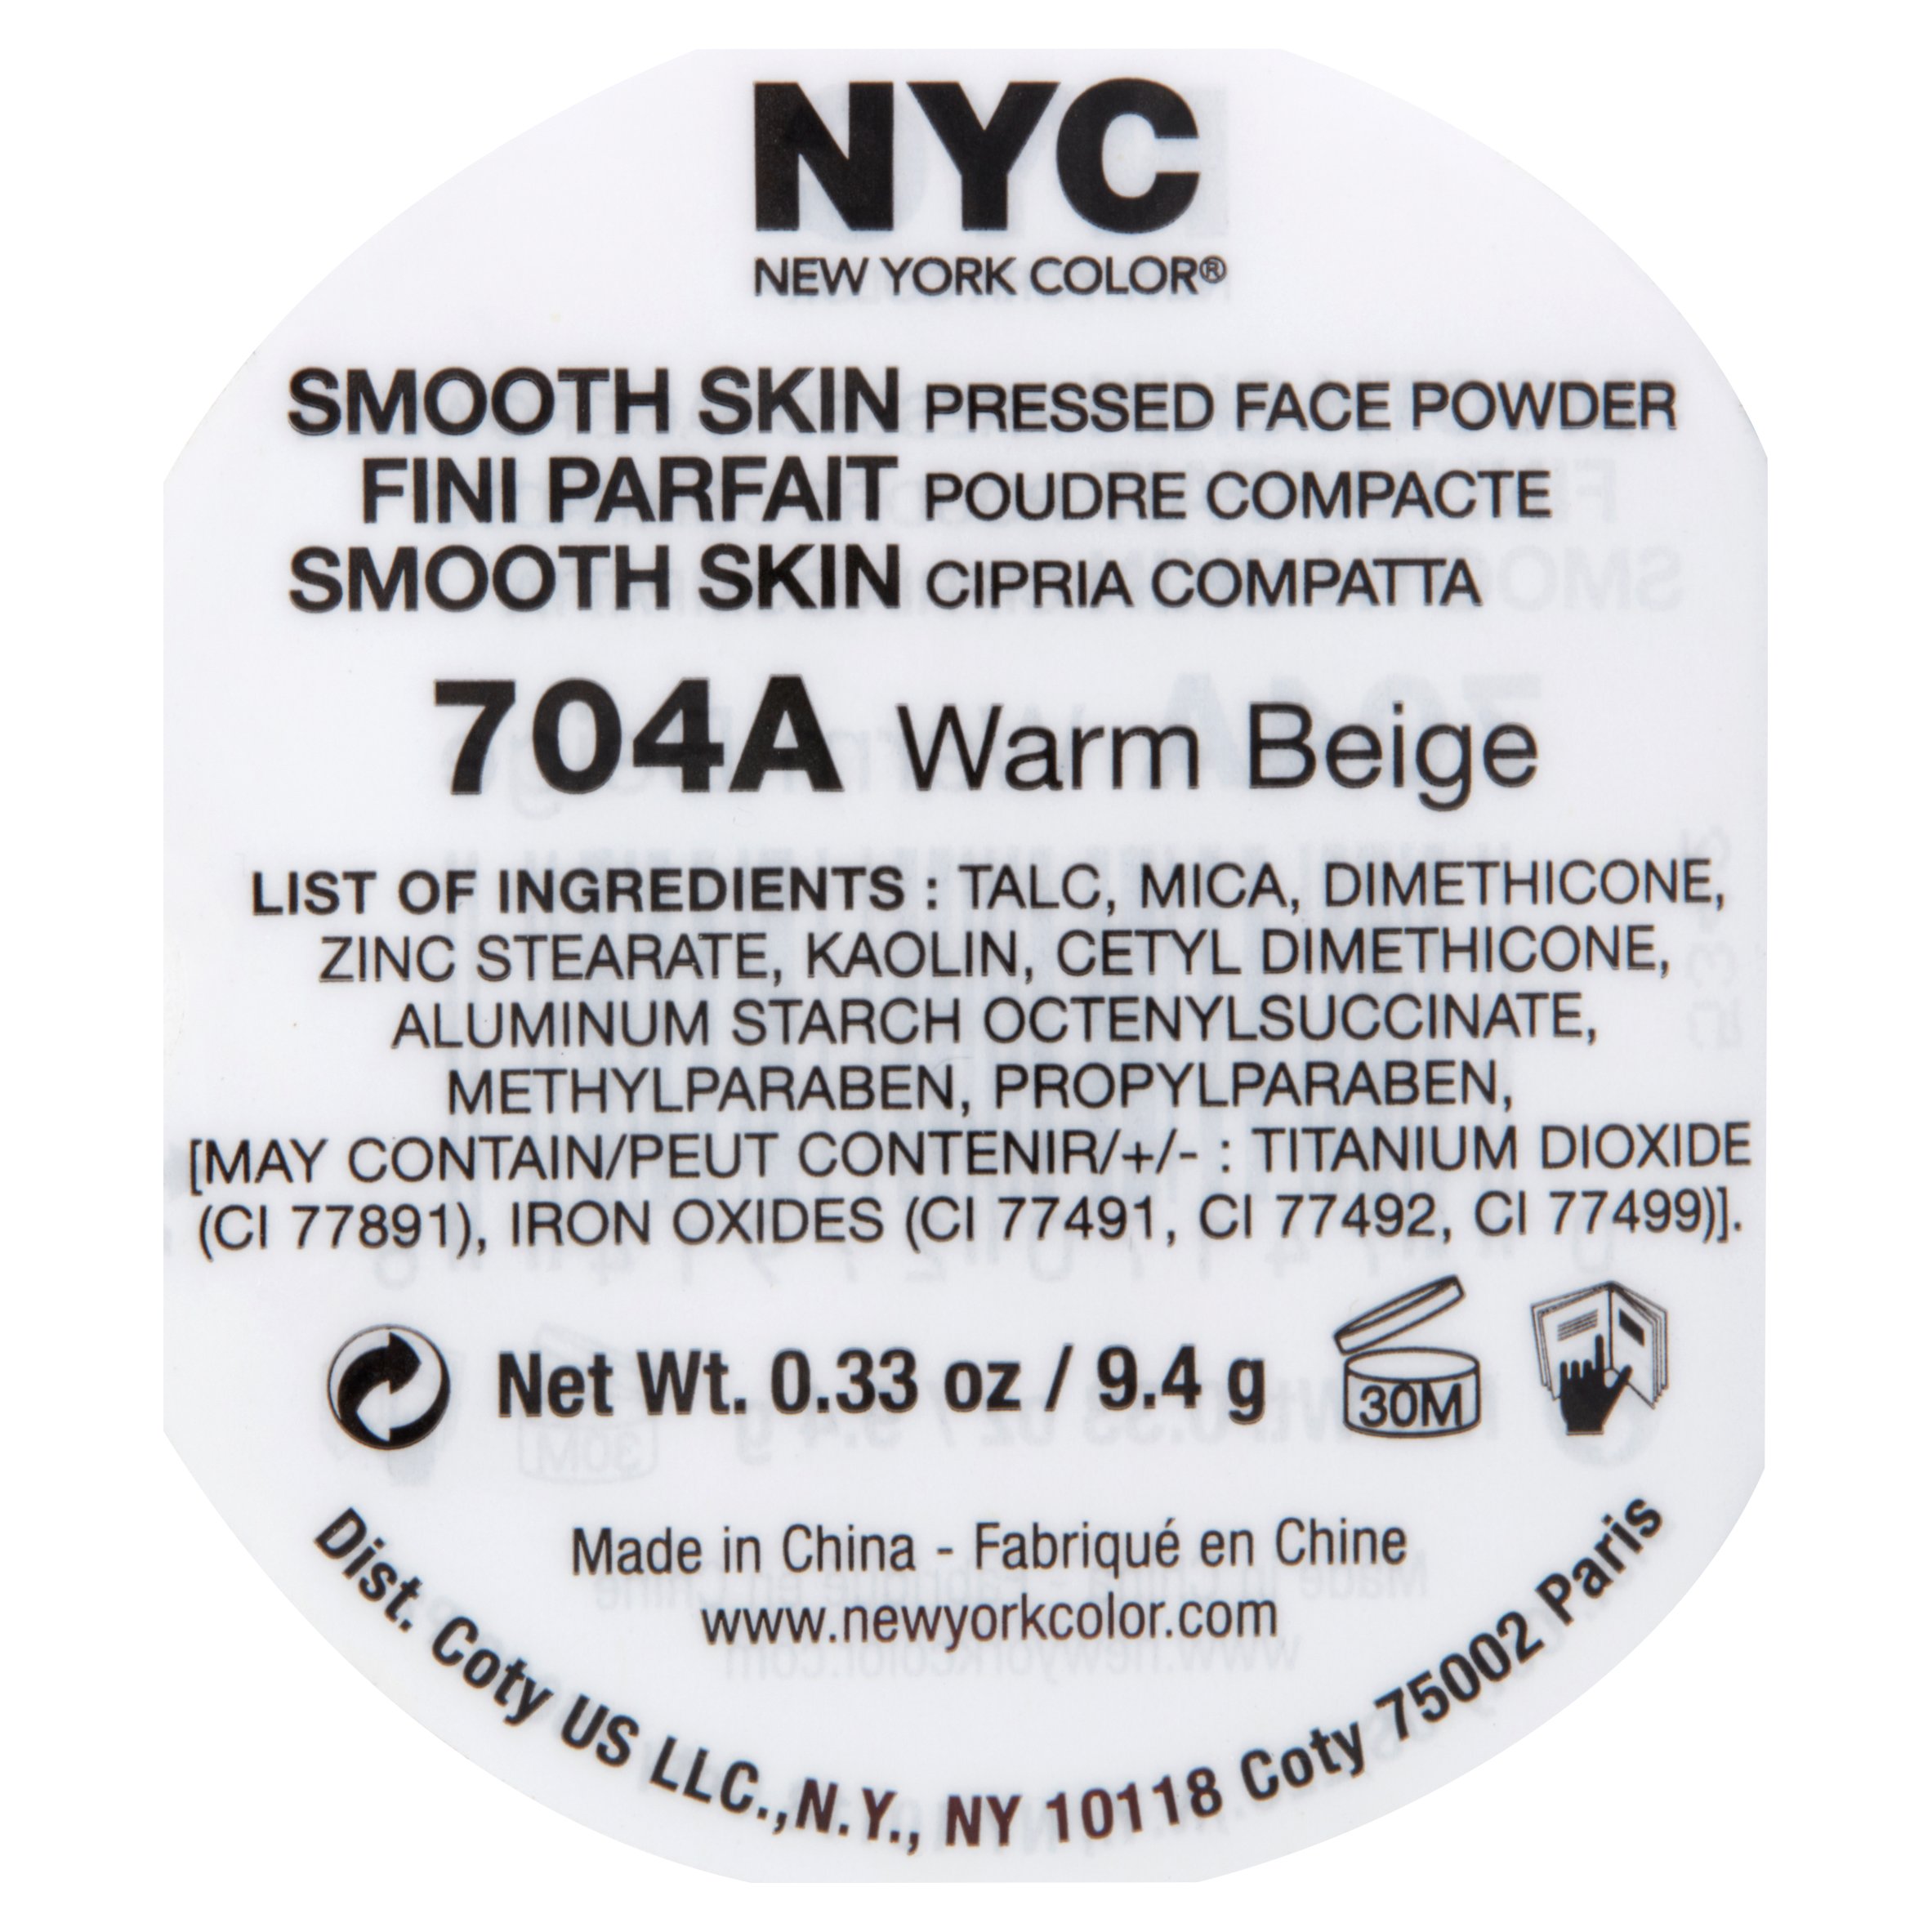 New york color smooth skin 704a warm beige pressed face powder, 0.33 oz - image 4 of 4